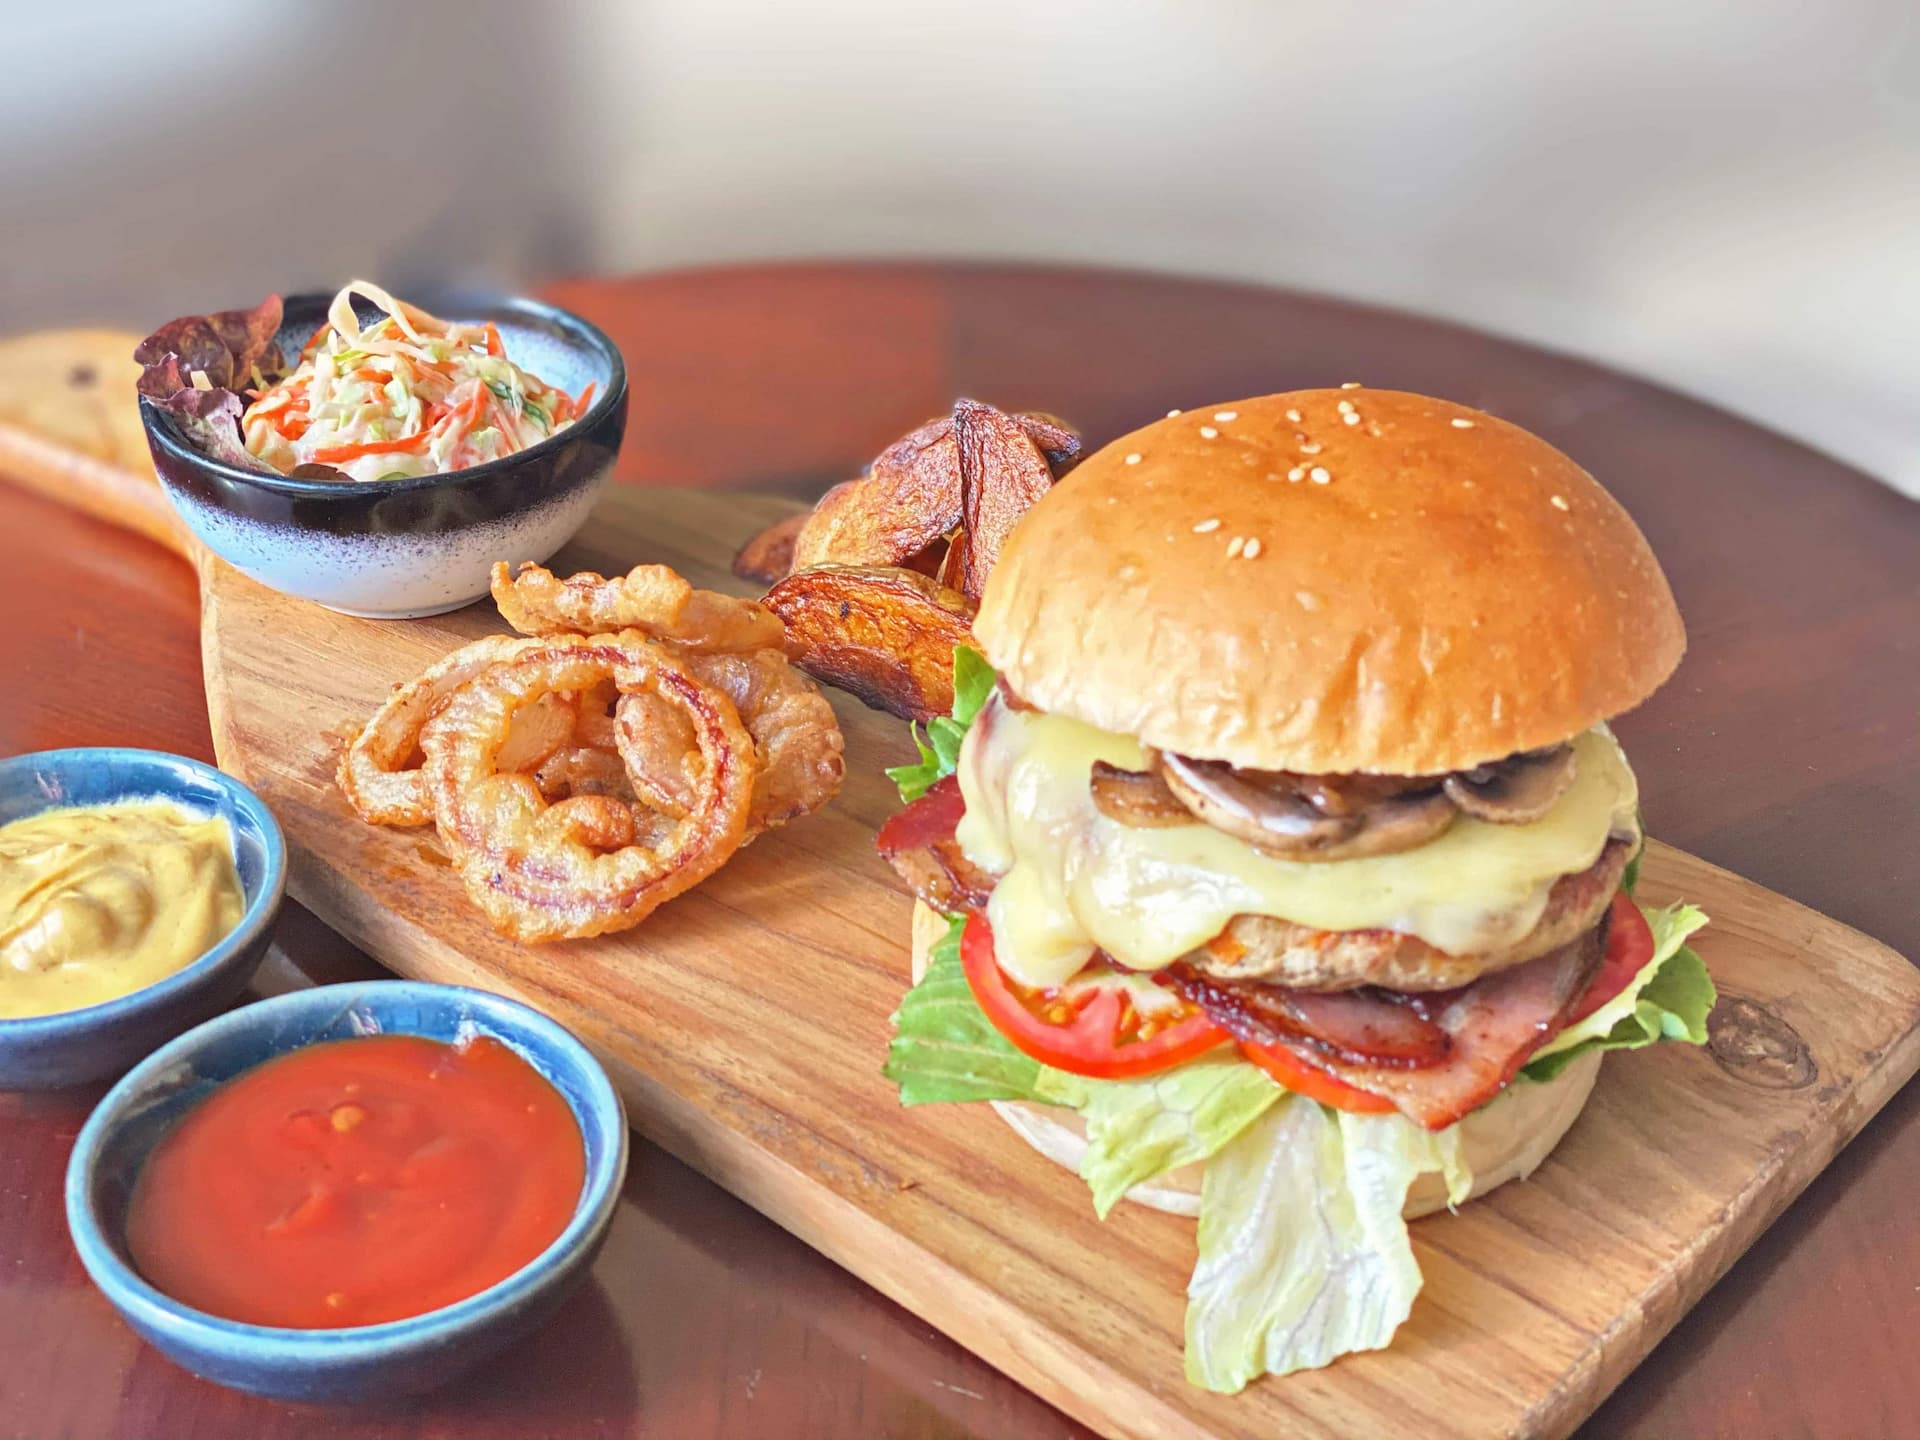 Juicy Burgers Straight From 5-Star Hotel To Your Plate